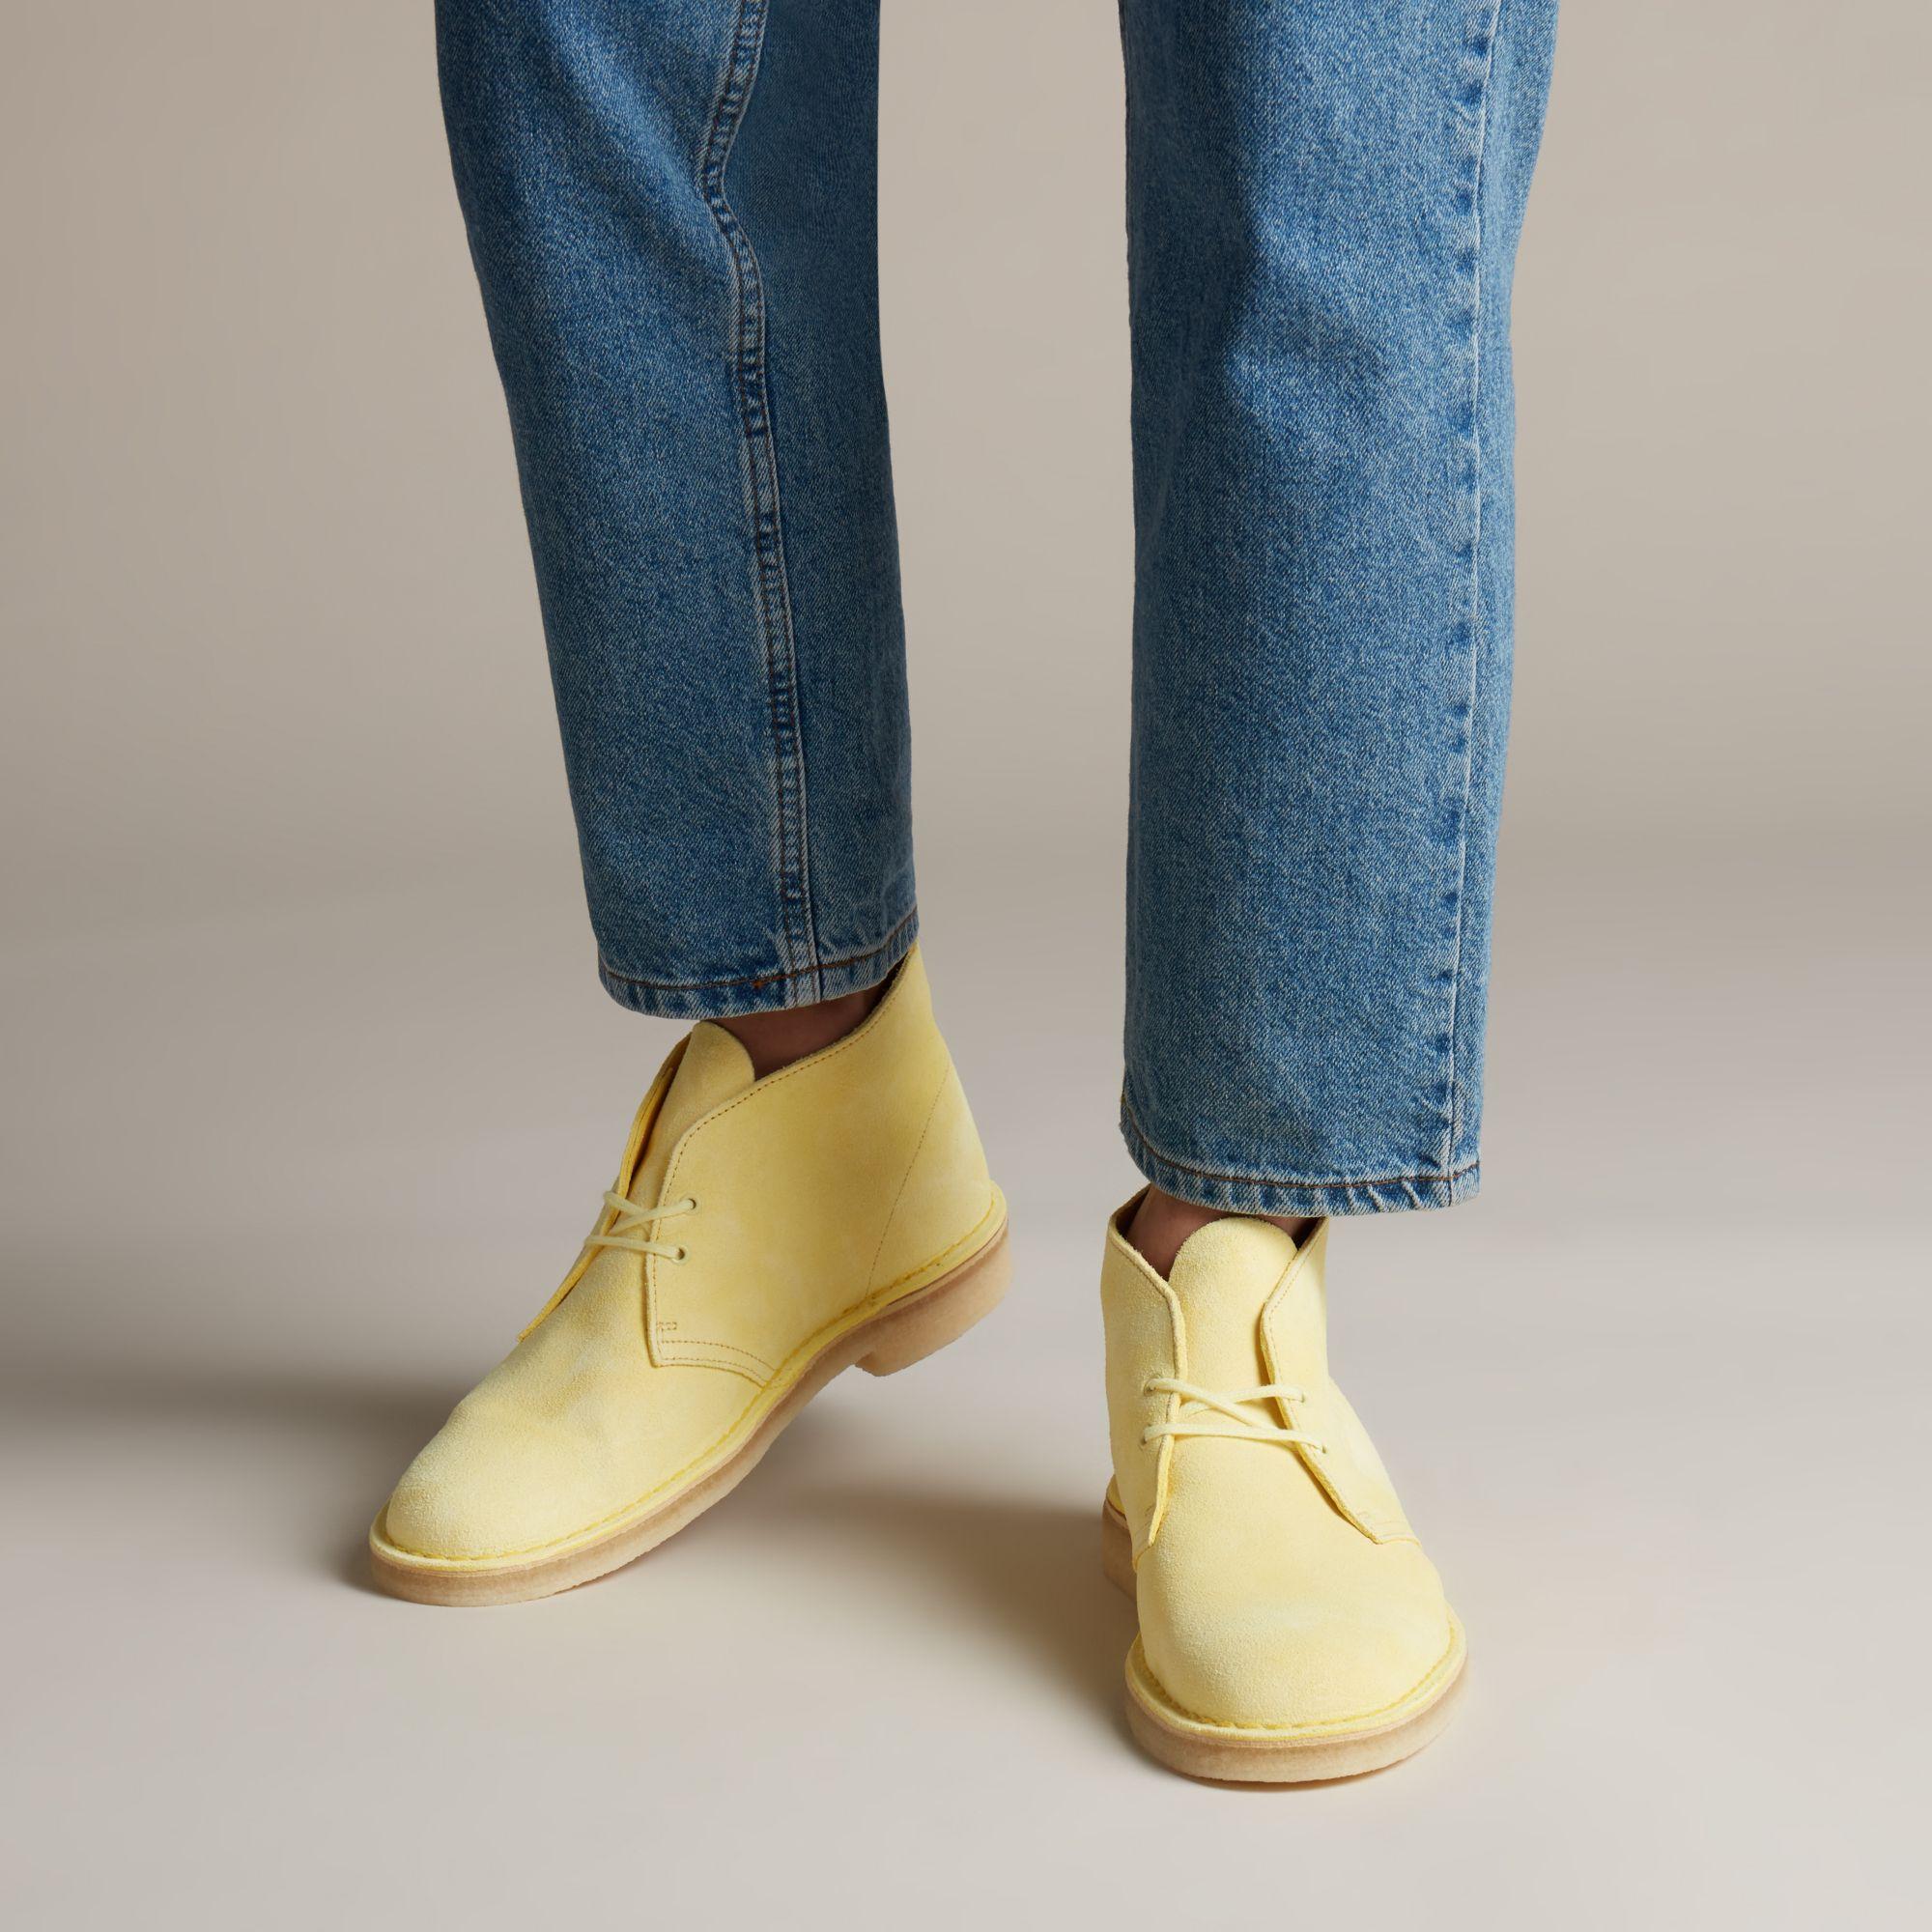 Clarks Suede Desert Boot in Pale Yellow (Yellow) for Men - Lyst